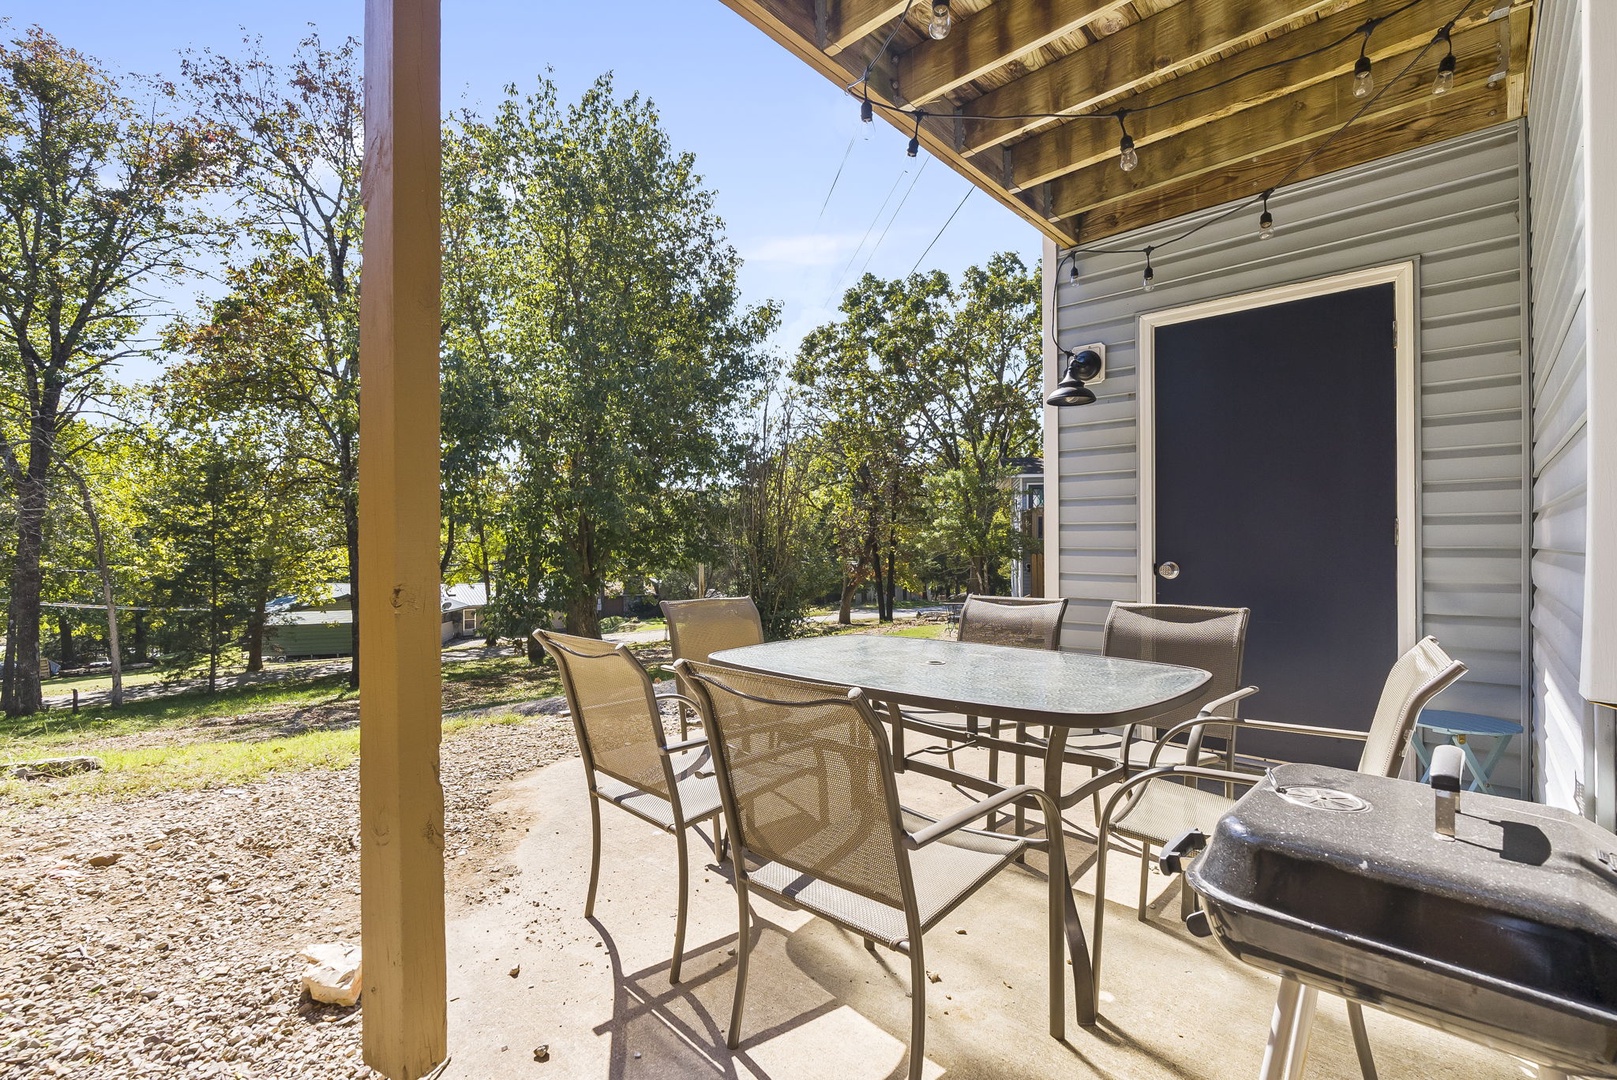 Unit 43: Step out into the fresh air & enjoy the sunny back patio